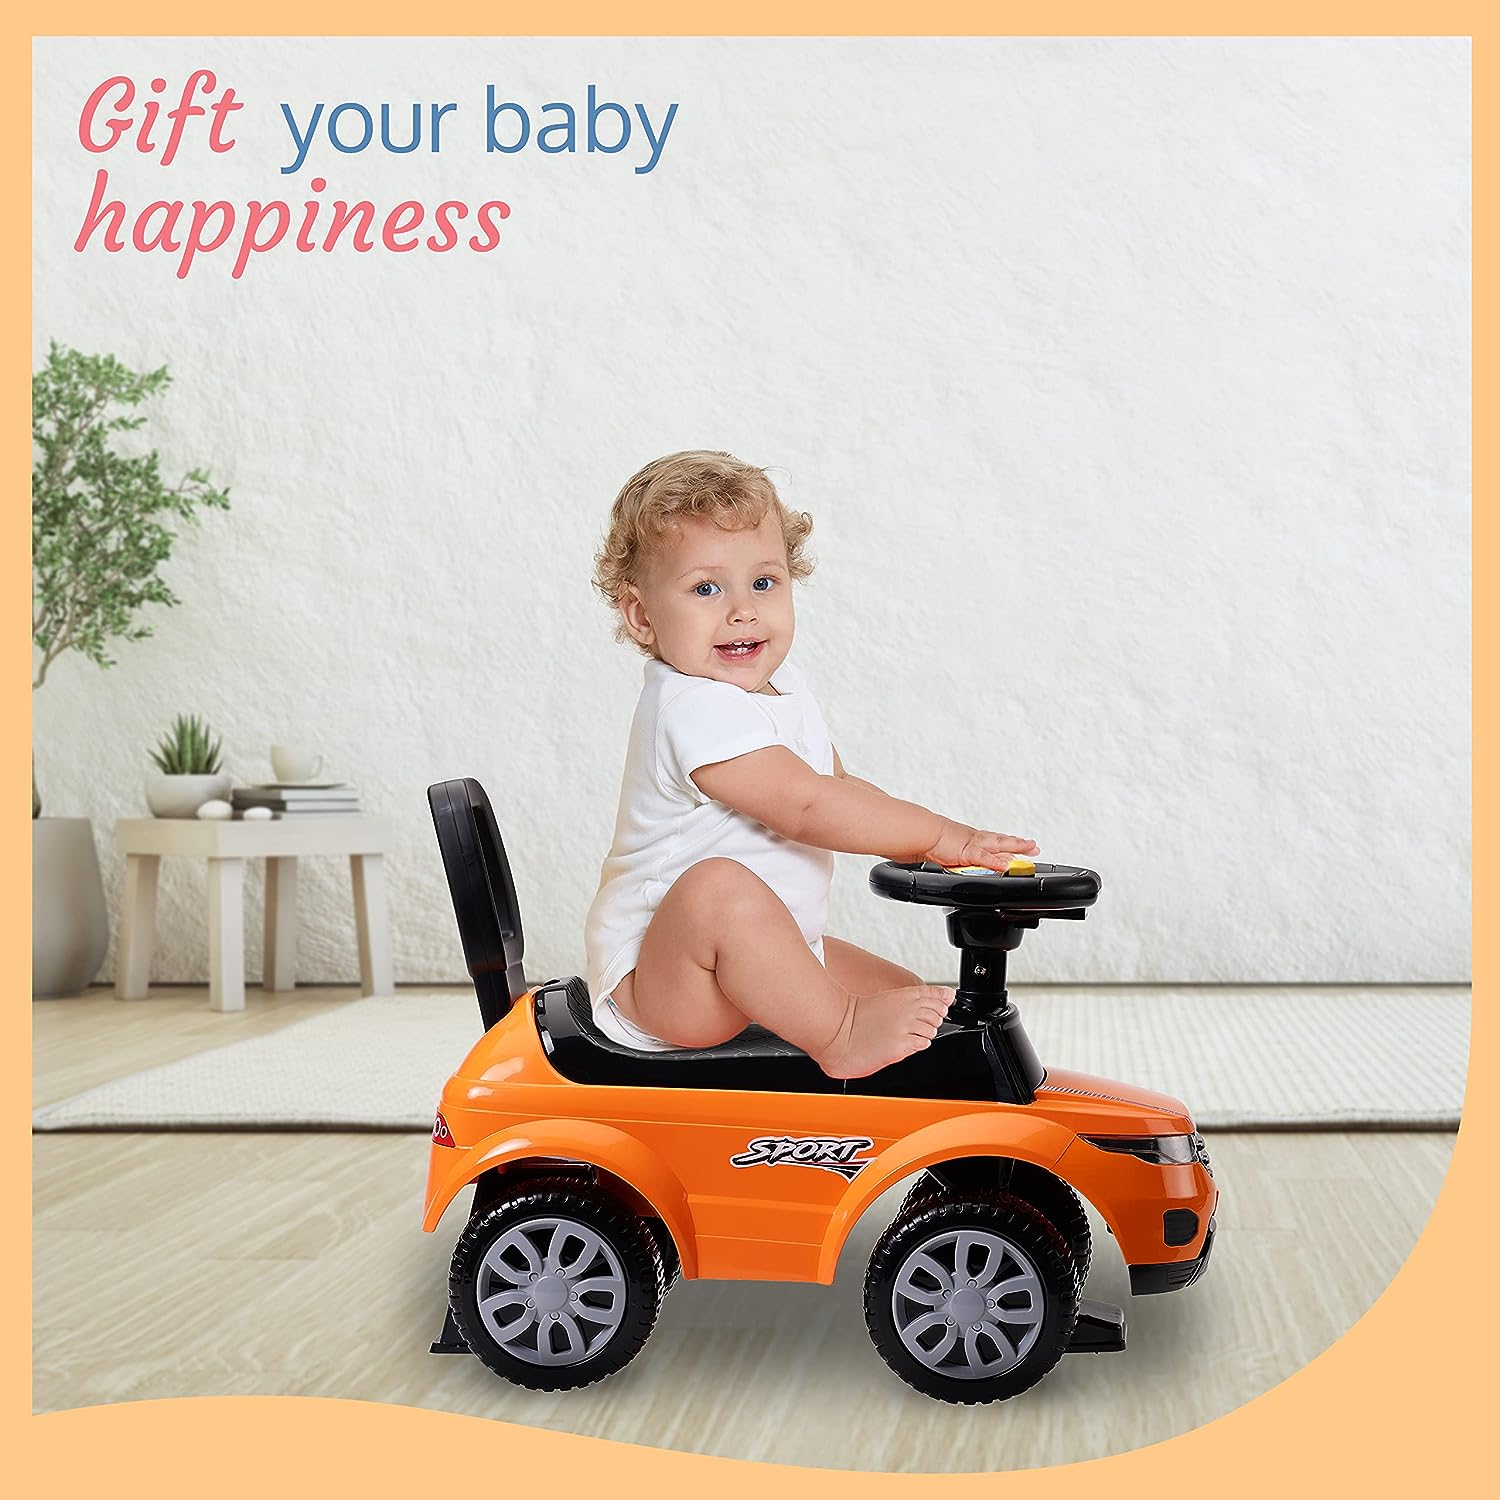 Starlight Ride-On Car for Kids with Music & Horn Steering, Push Car for Baby with Backrest, Safety Guard, Under Seat Storage & Big Wheels | Ride-On for Kids 1 to 3 Years Up to 25 Kgs (Orange)